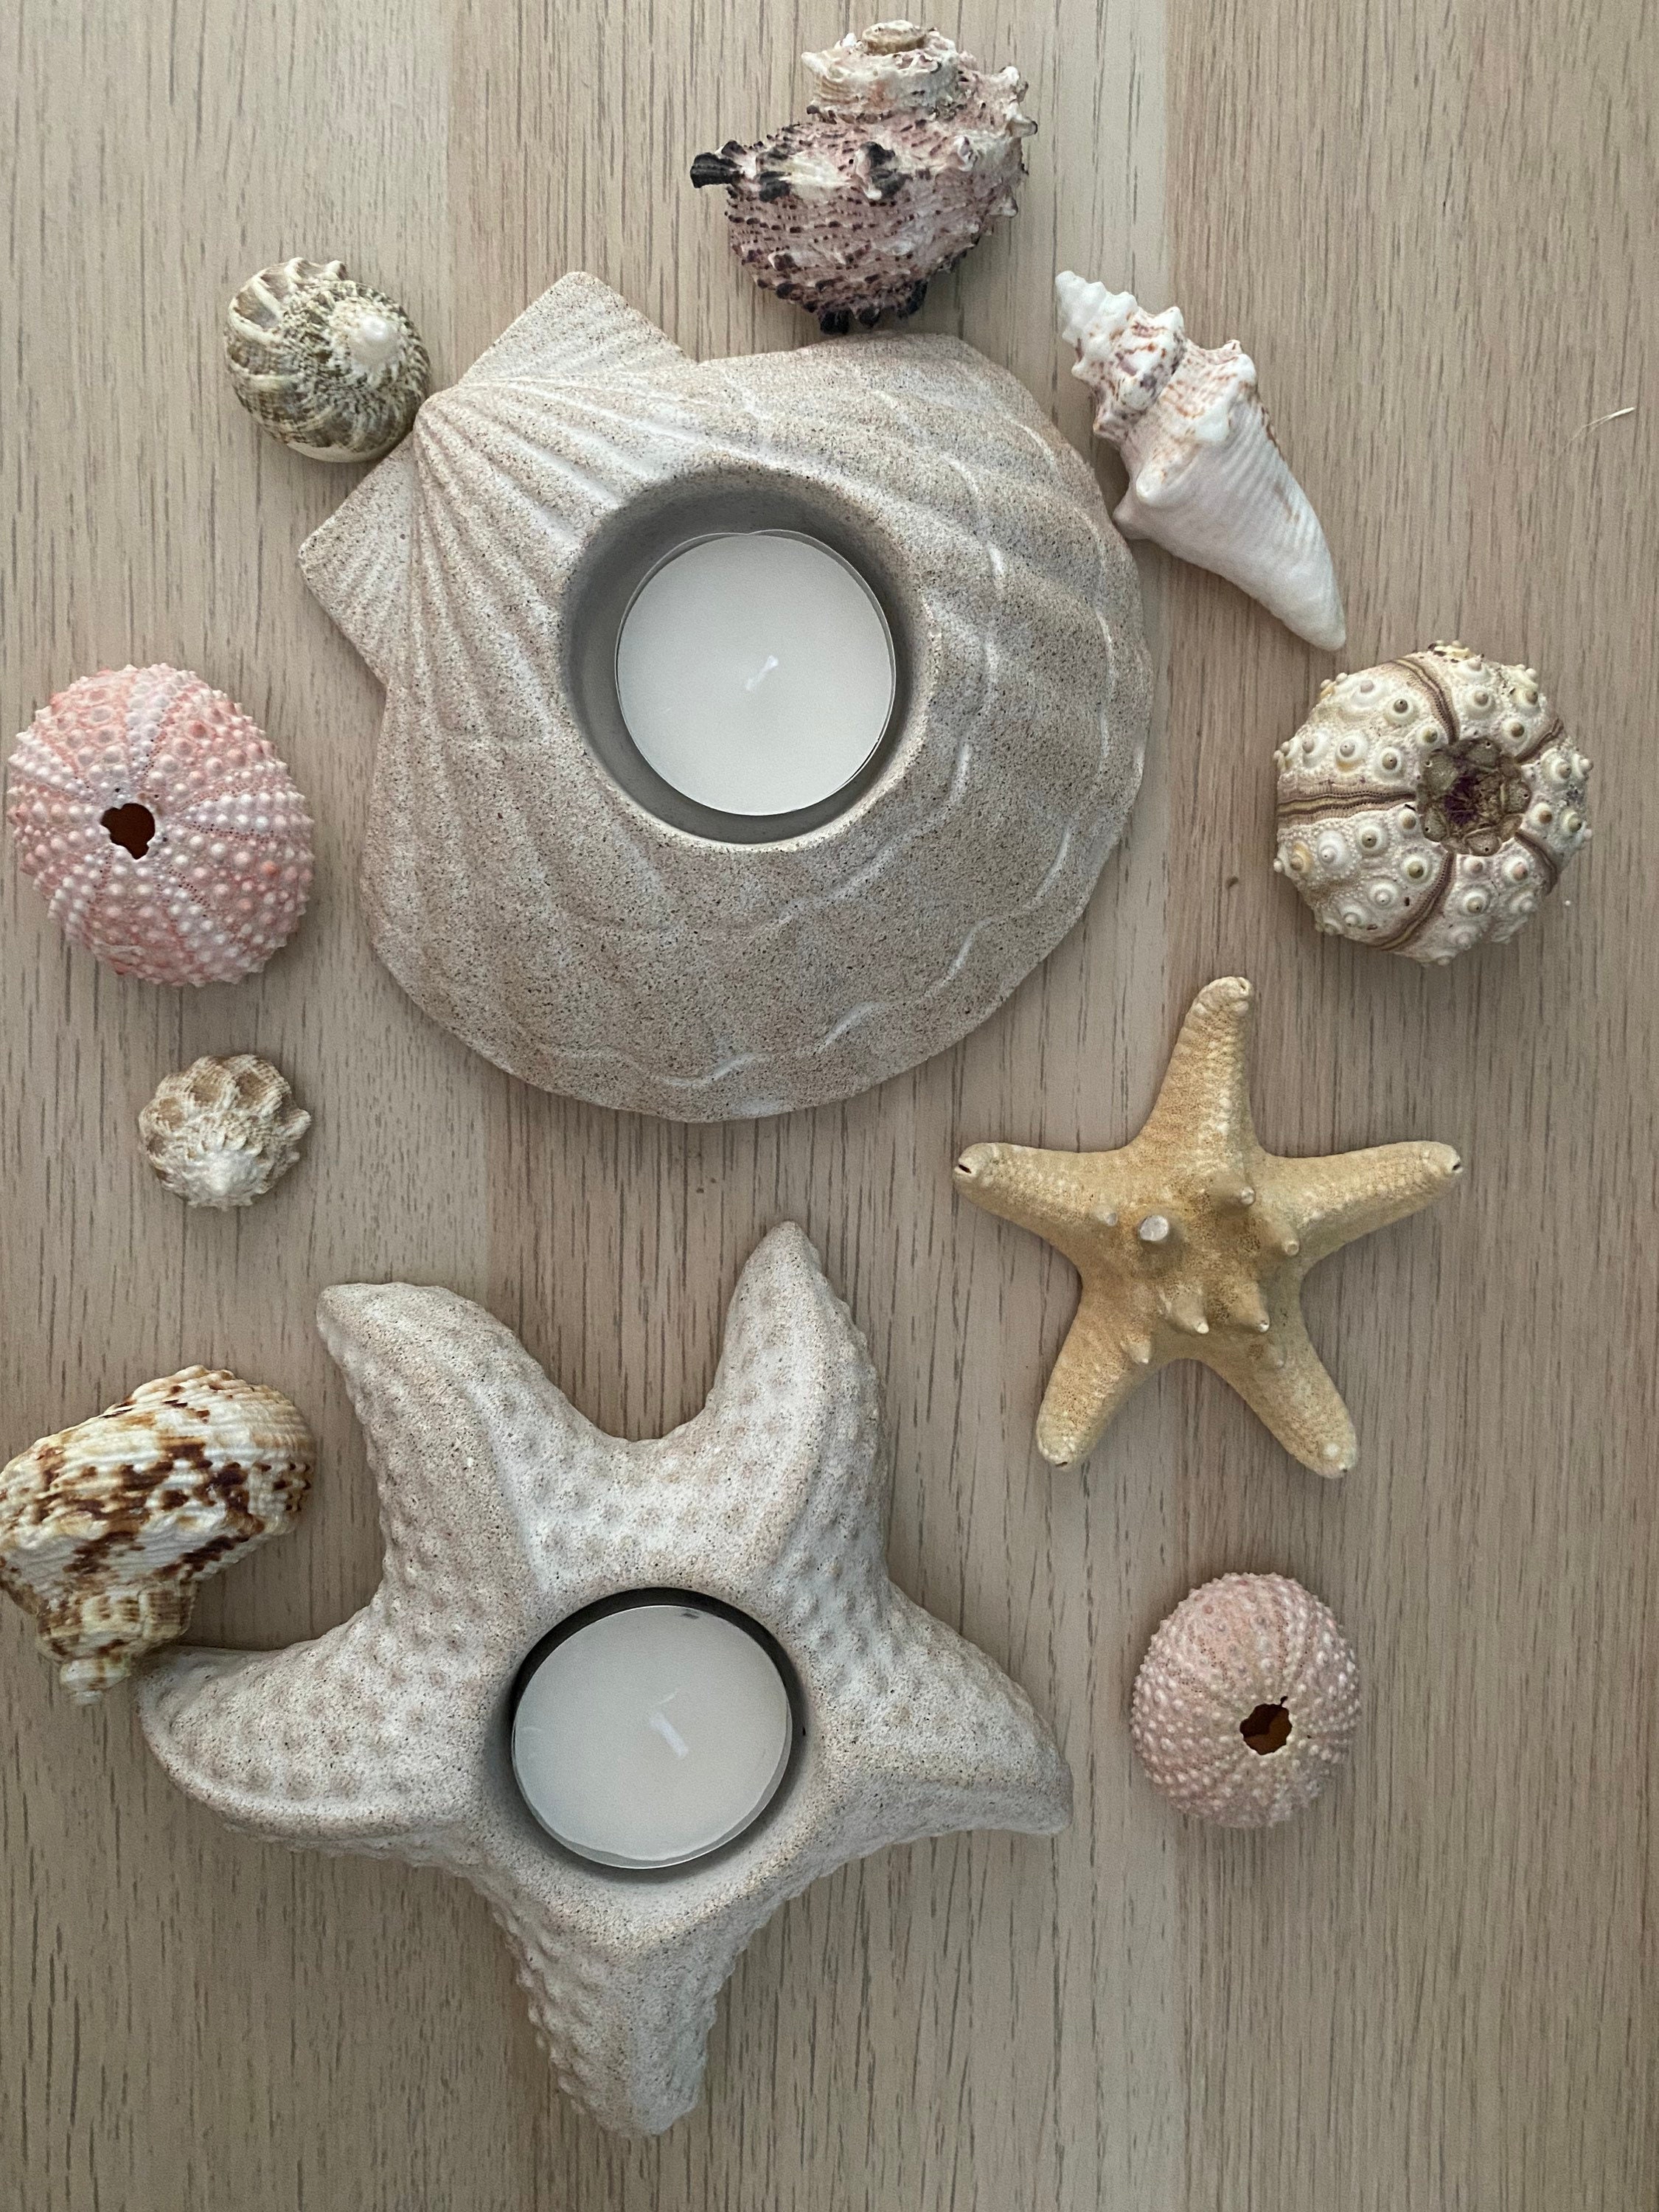 Plaster of Paris Crafts - Miniature Seashells and Starfish Pictures